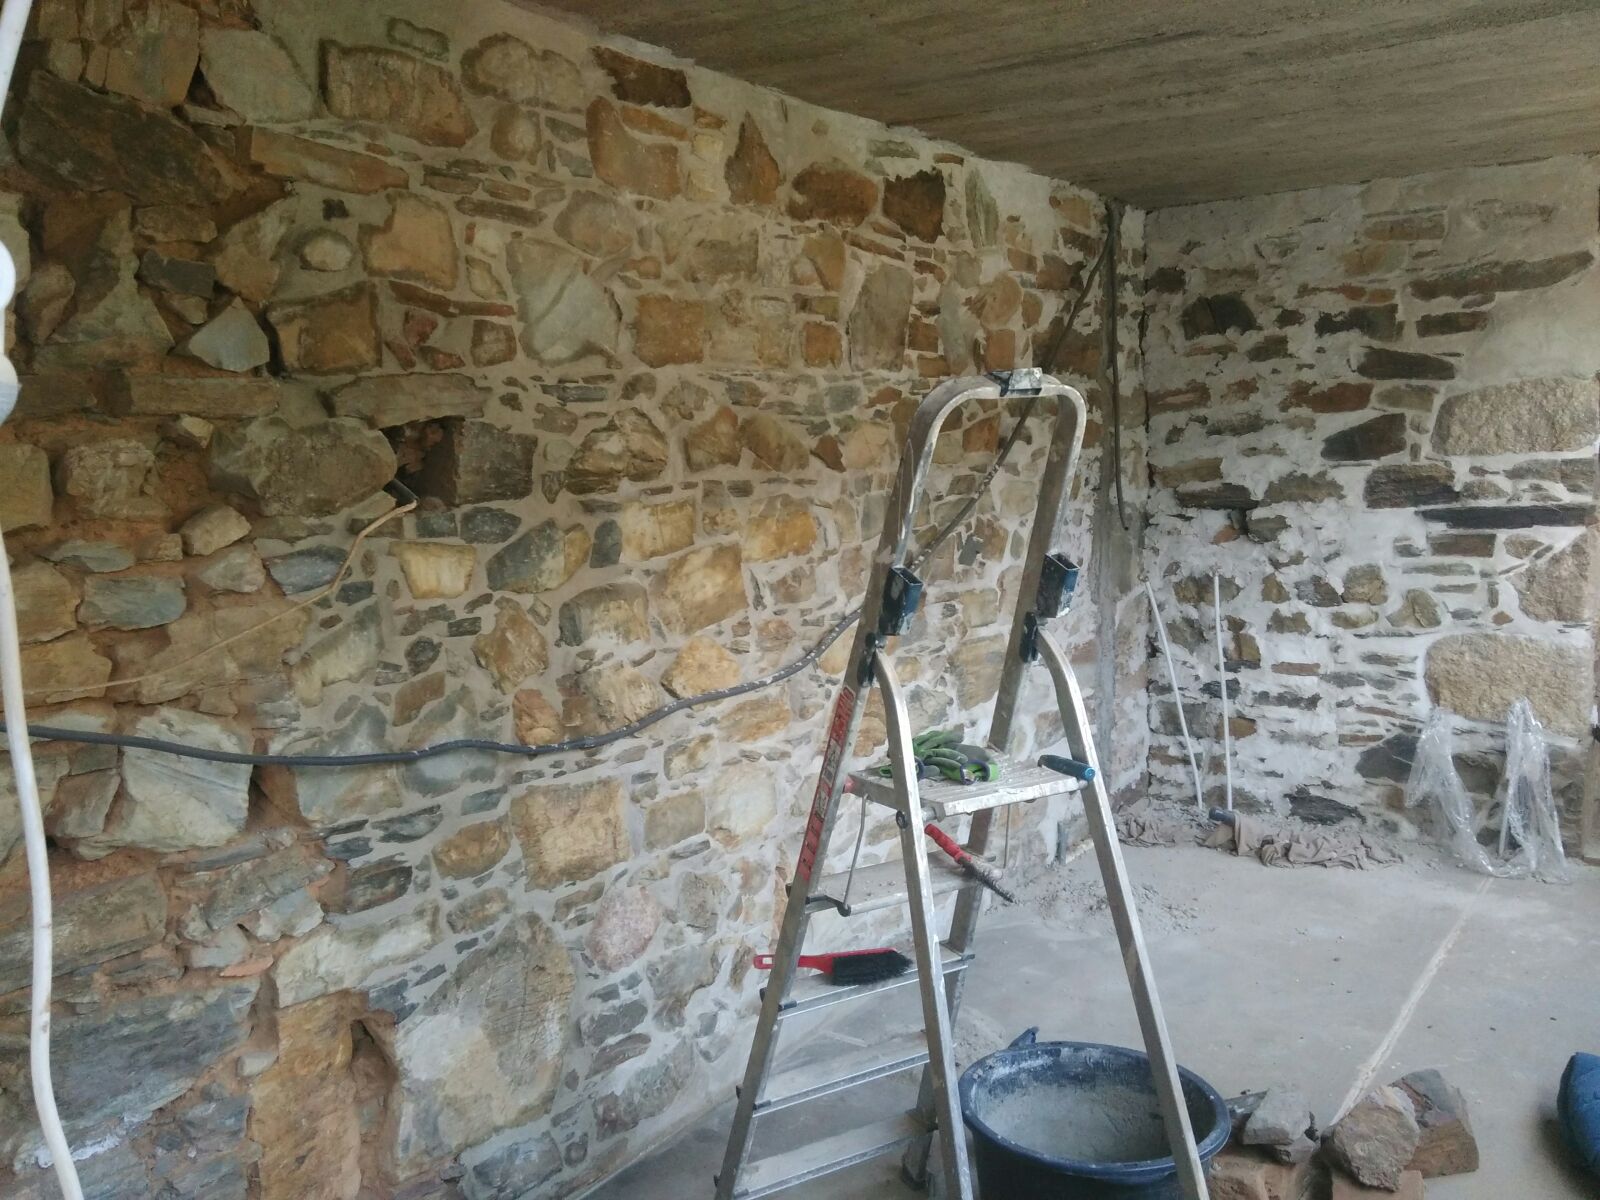 On March 3, 2018—two weeks before Marilisa, me and Jorrit would get to see the finished result—Laurelin made this photo. By this time, she had repointed most of wall between her pig sty and the adega, except for the left-most part. And you can see a chunk of wall, right of the corner, where she still had to brush off the excess mortar.